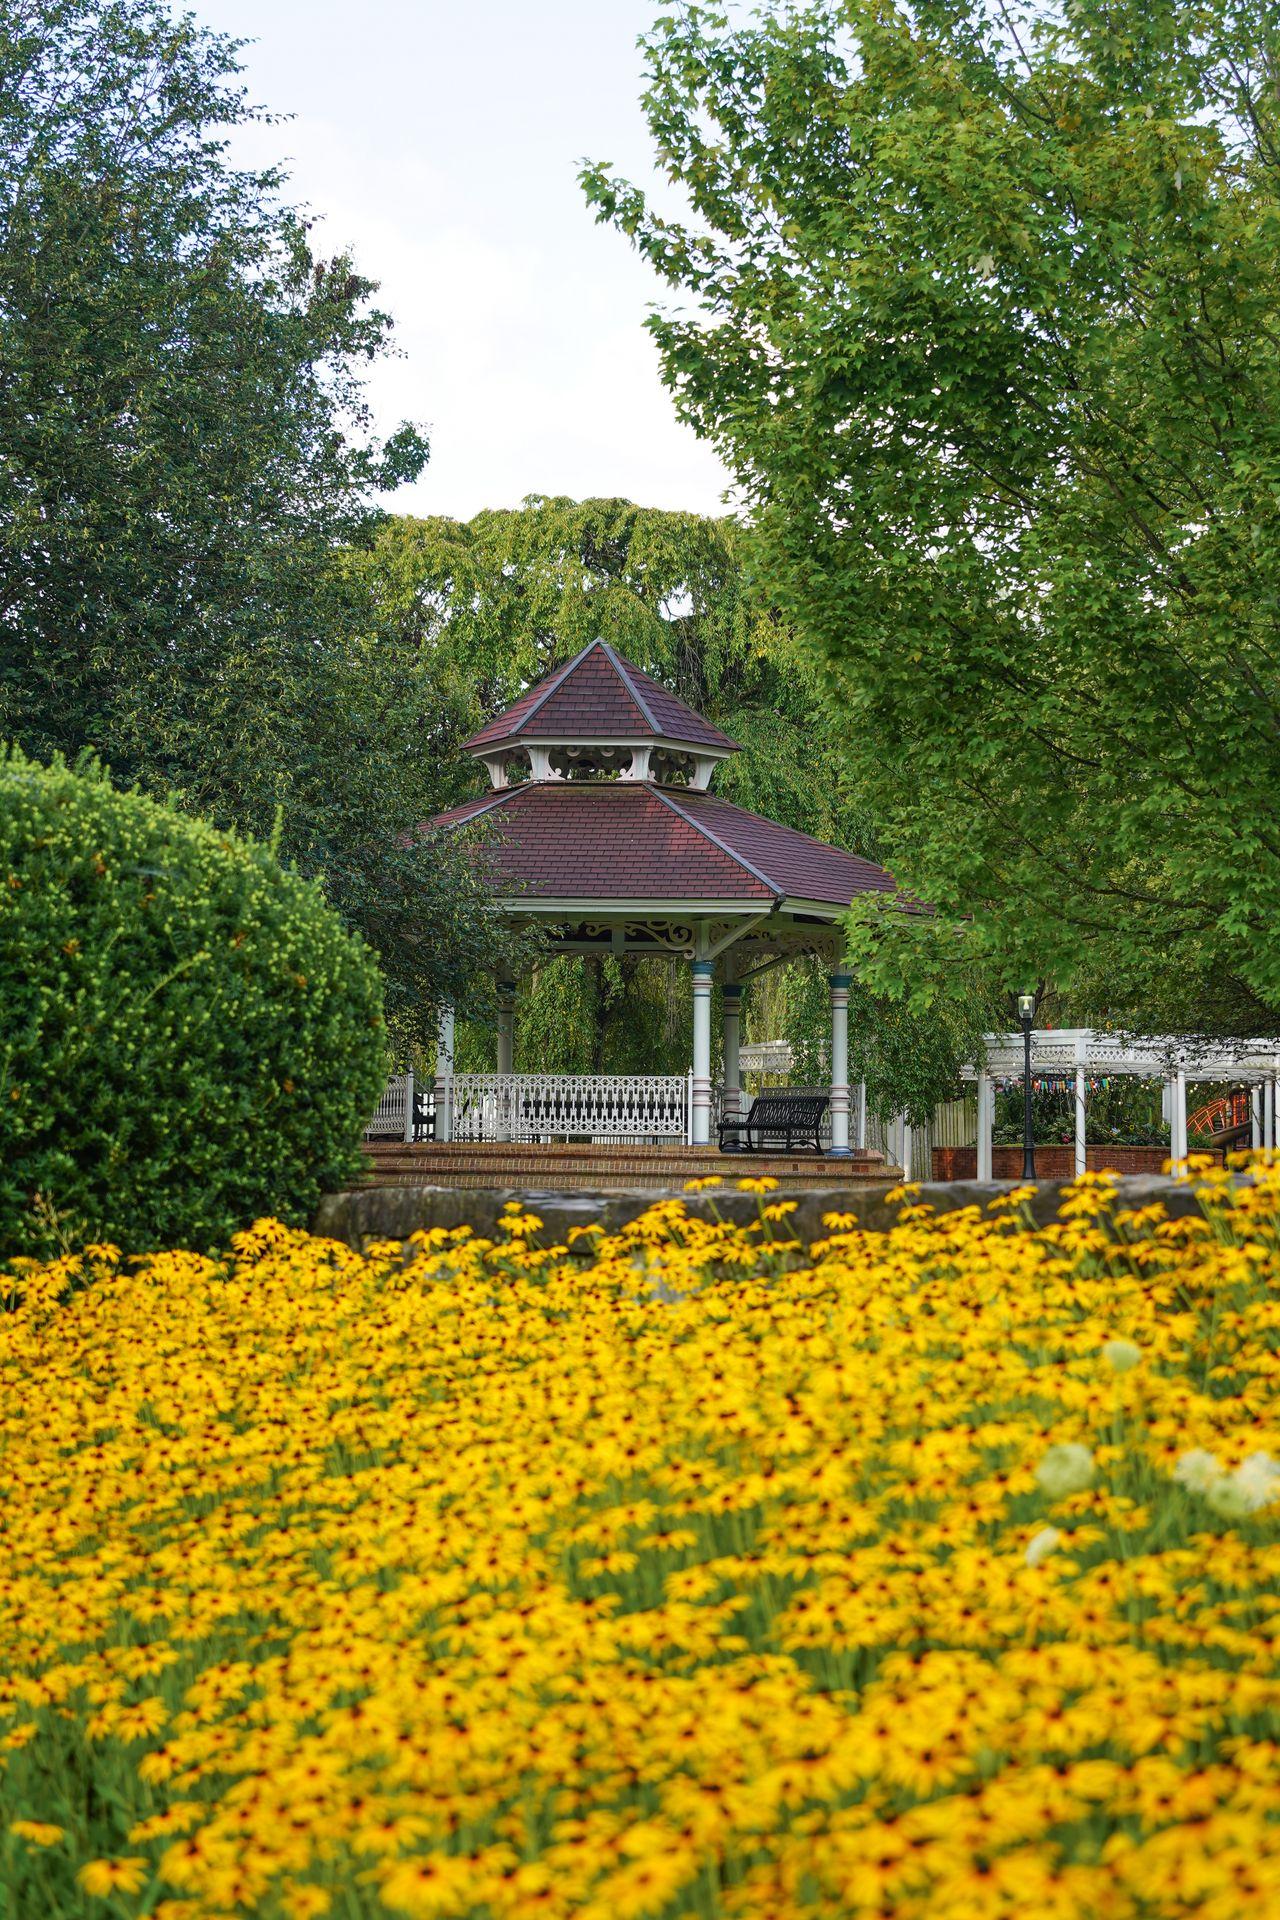 A gazebo in Talleyrand Park with yellow flowers in the foreground.